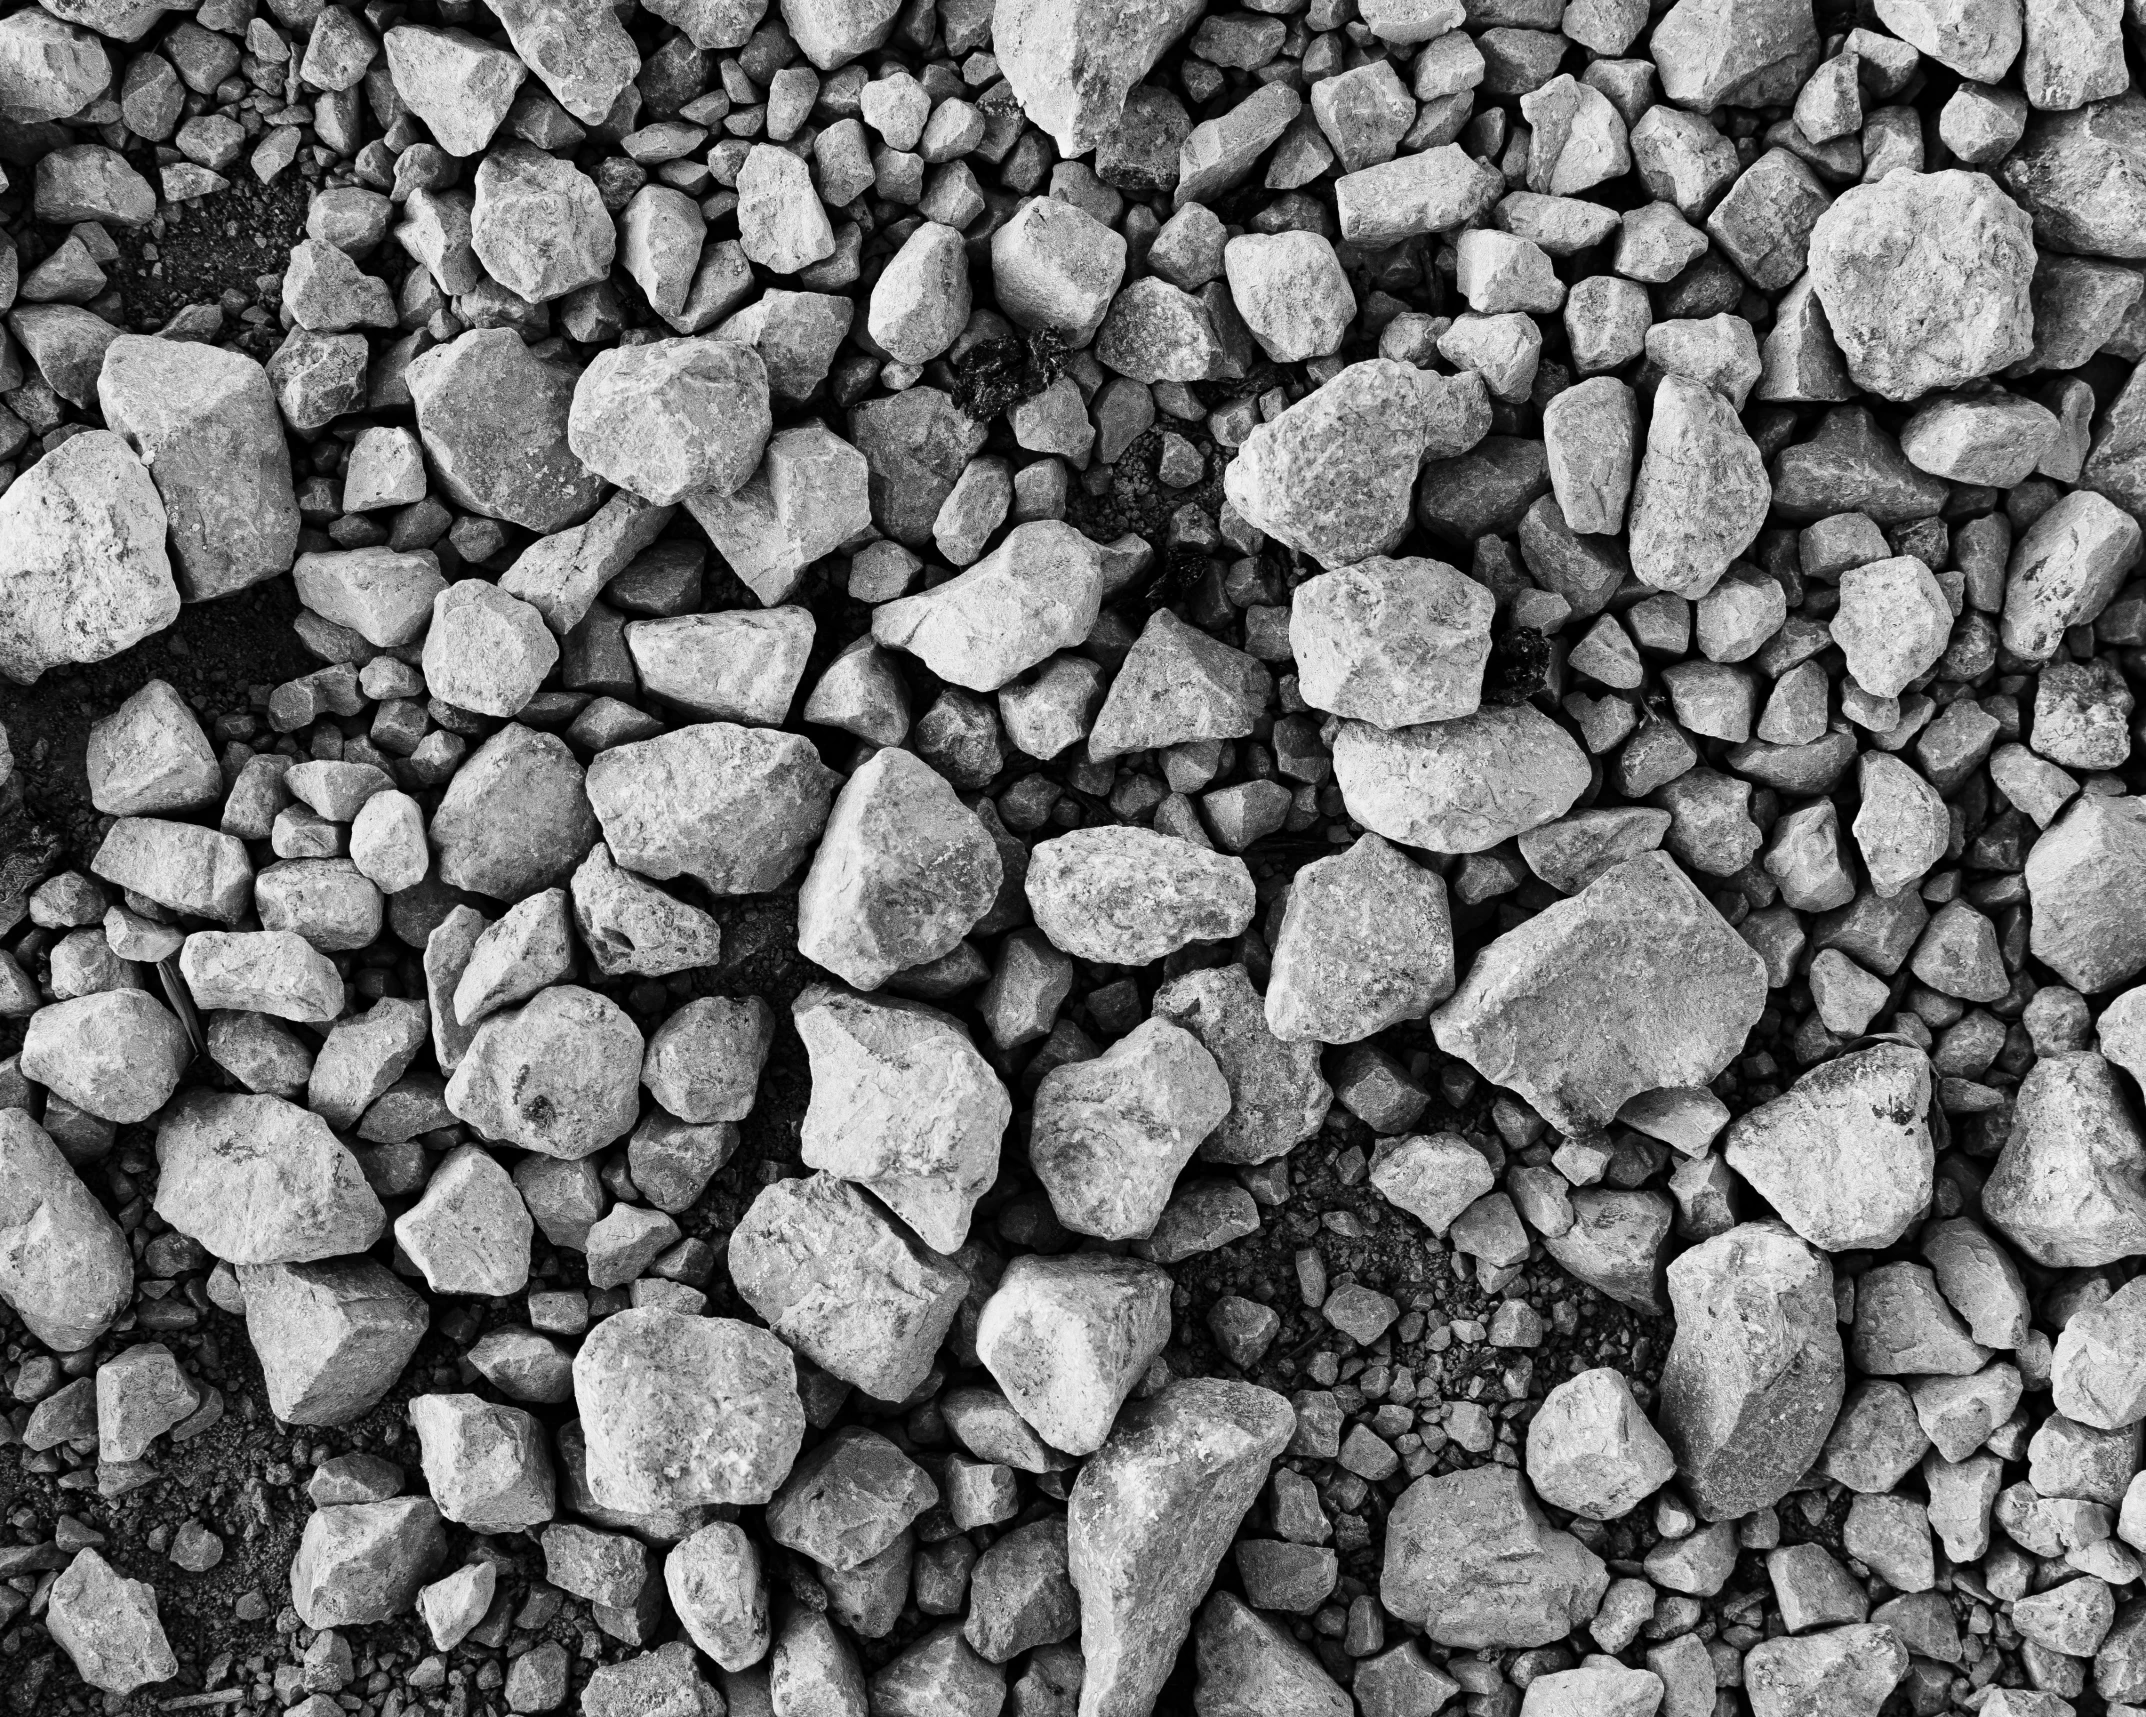 several different types of rocks in a black and white po